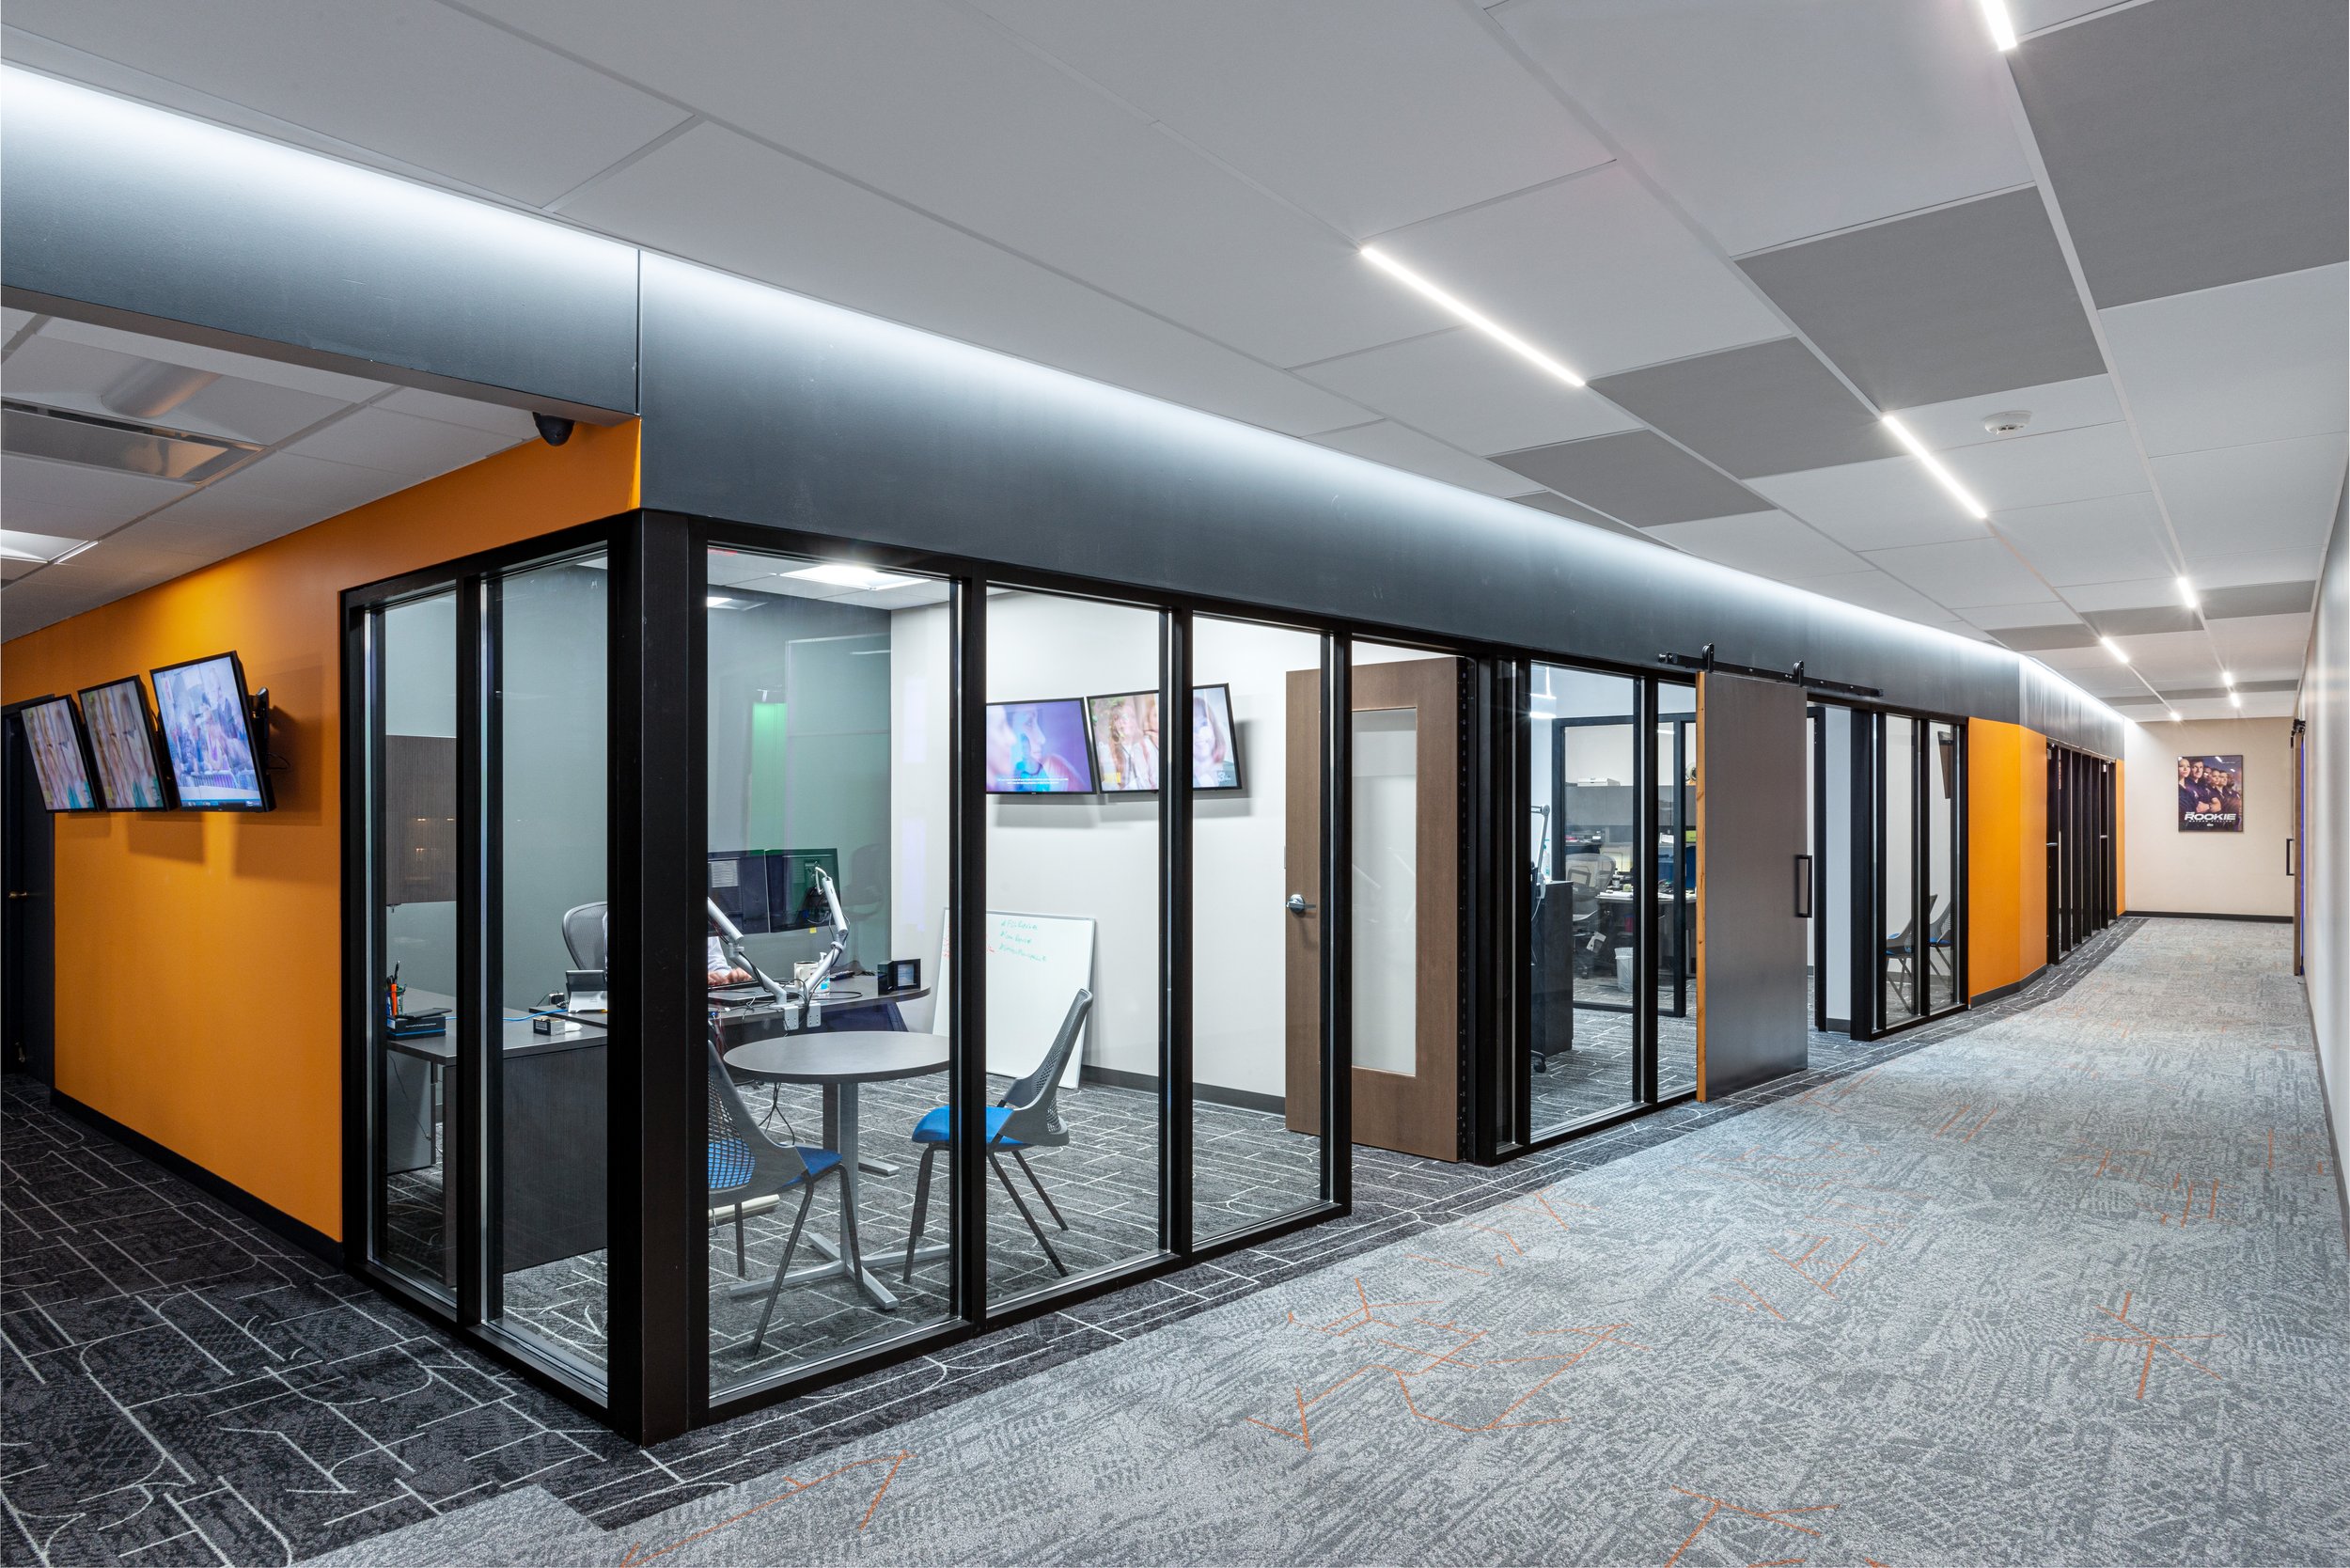 Commercial architectural photographer Al Ensley's work of an interior corporate office.